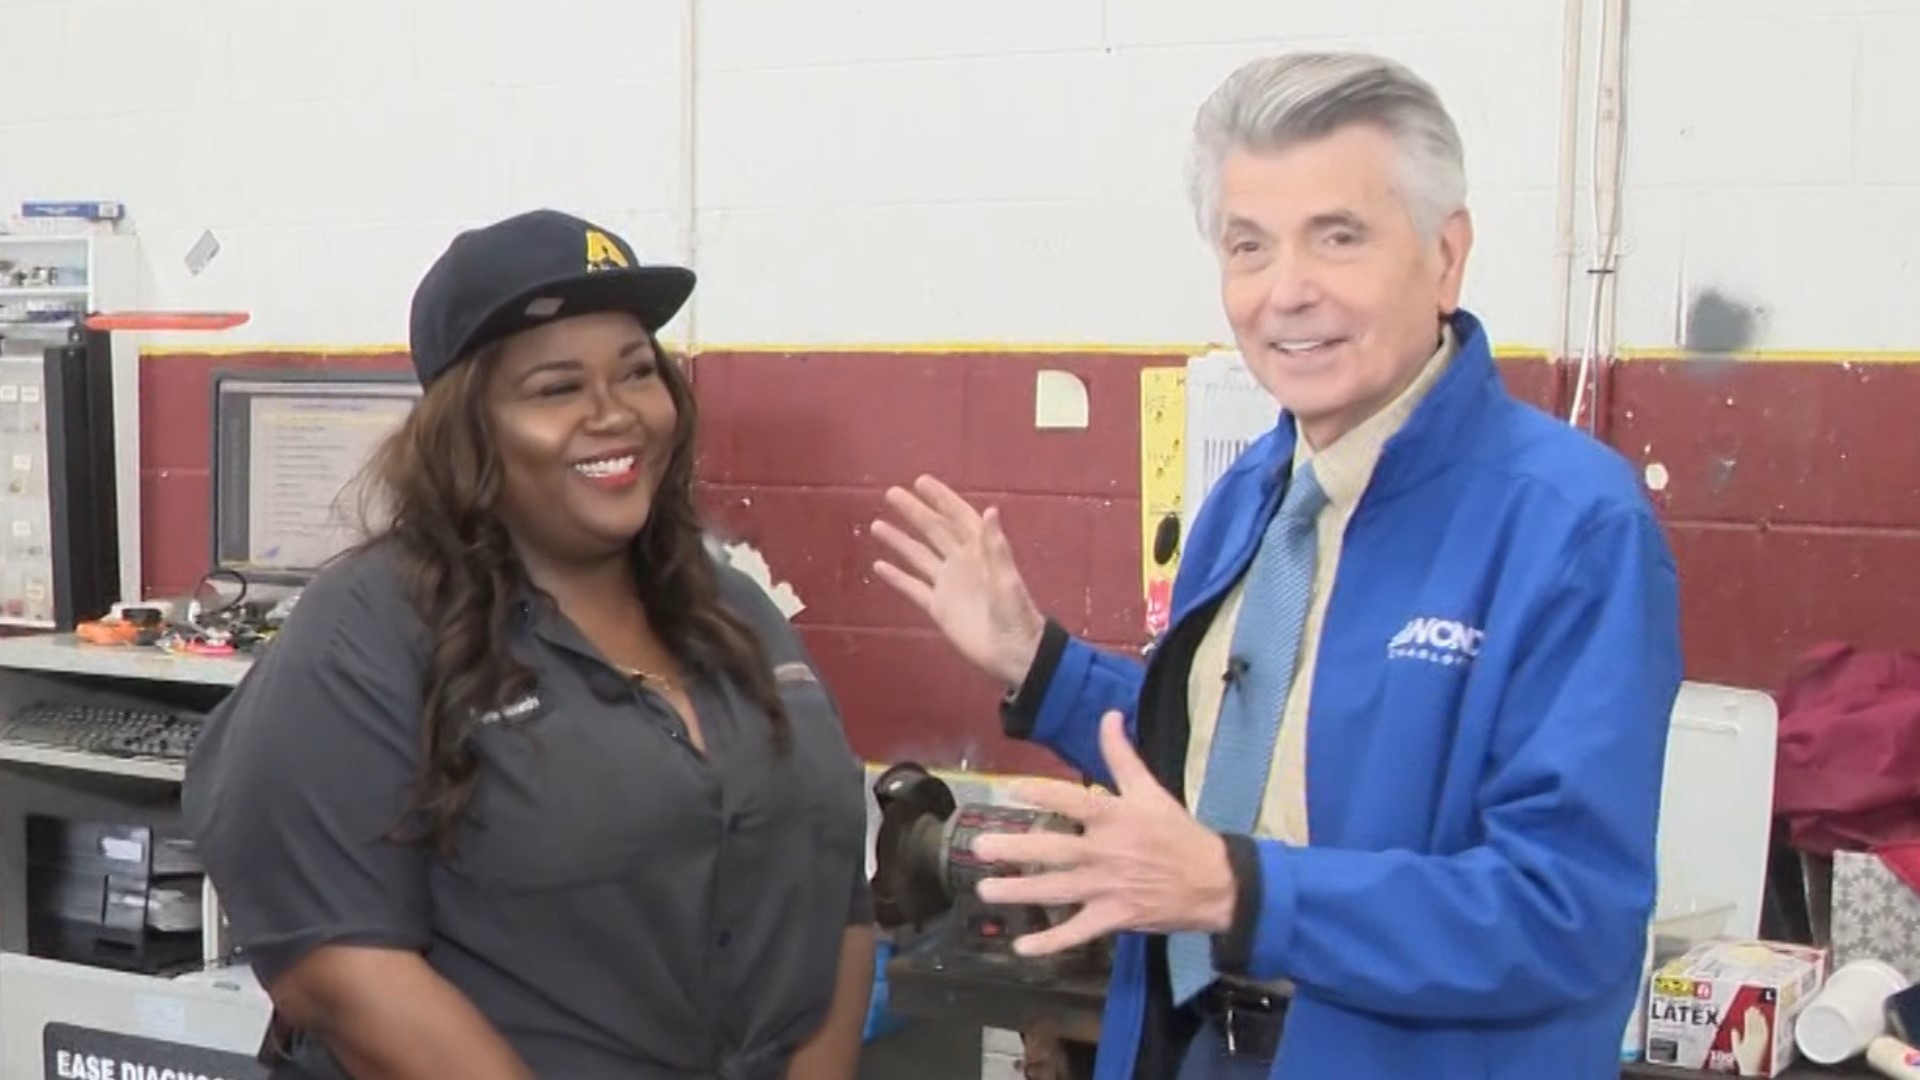 Empriss Alexandra is a hard-working mechanic making sure thousands of vehicles get where they need to go, and she's influencing more women to get under the hood.